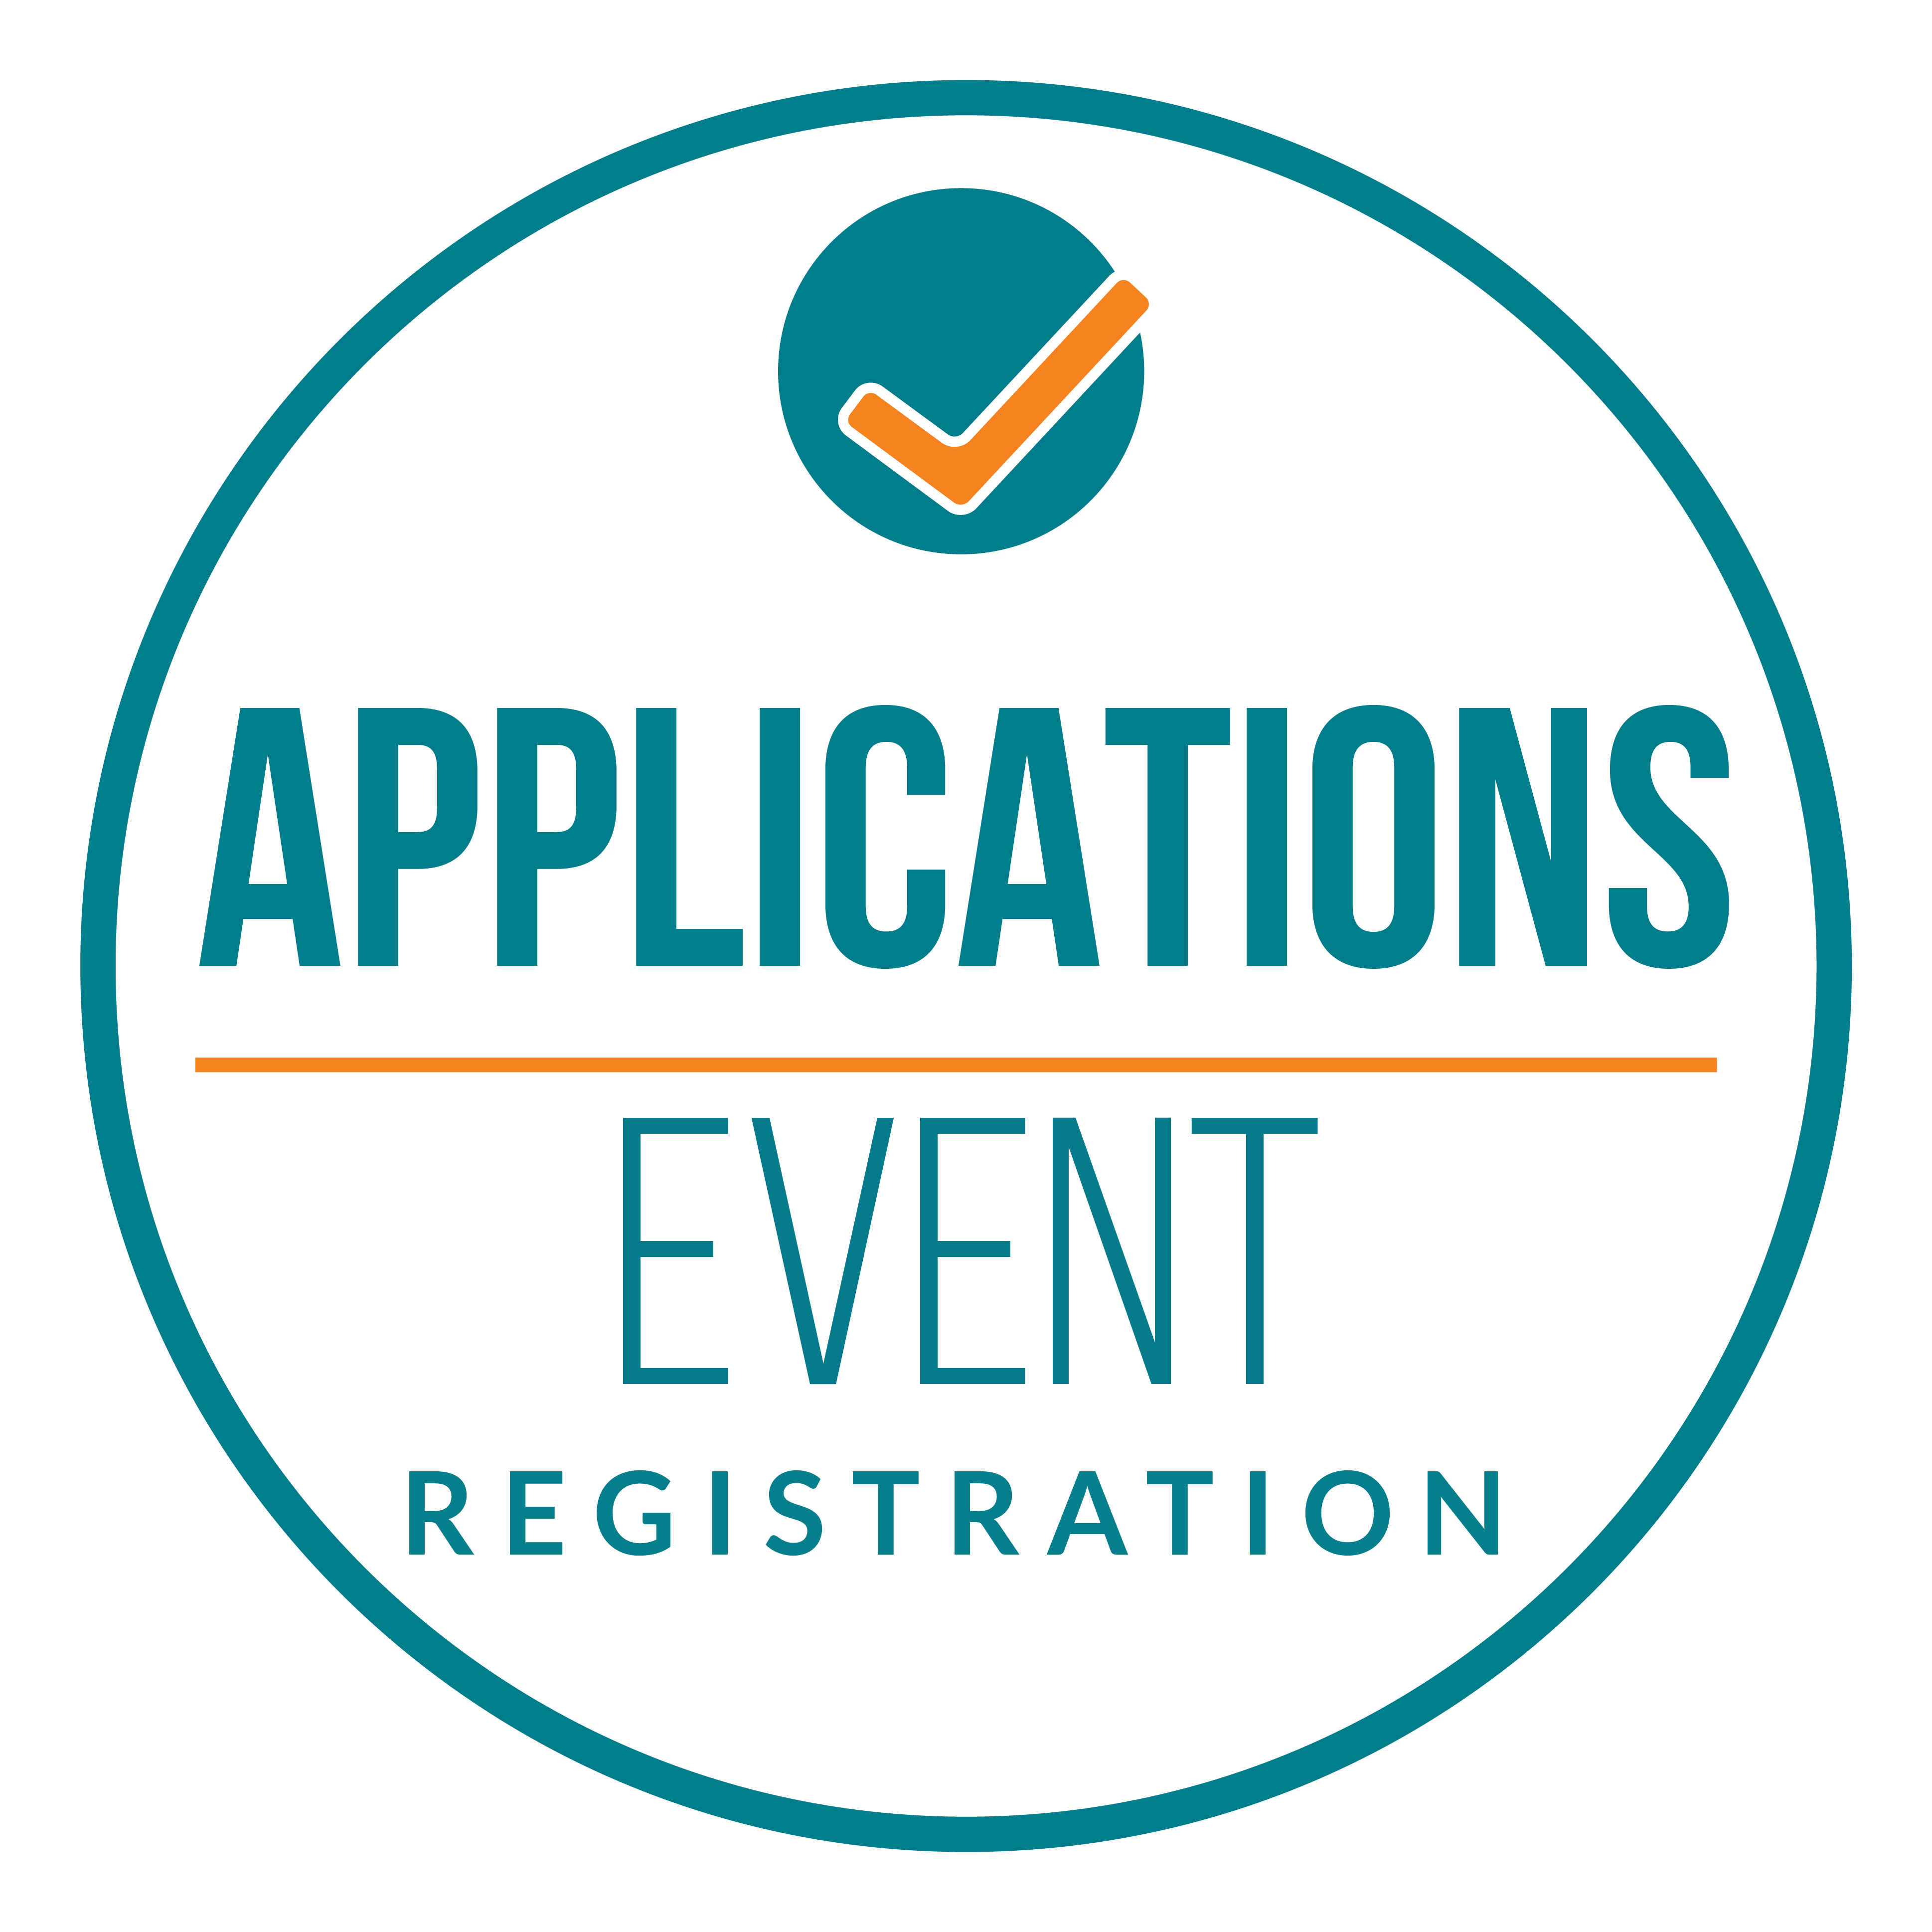 Applications and Event Registration